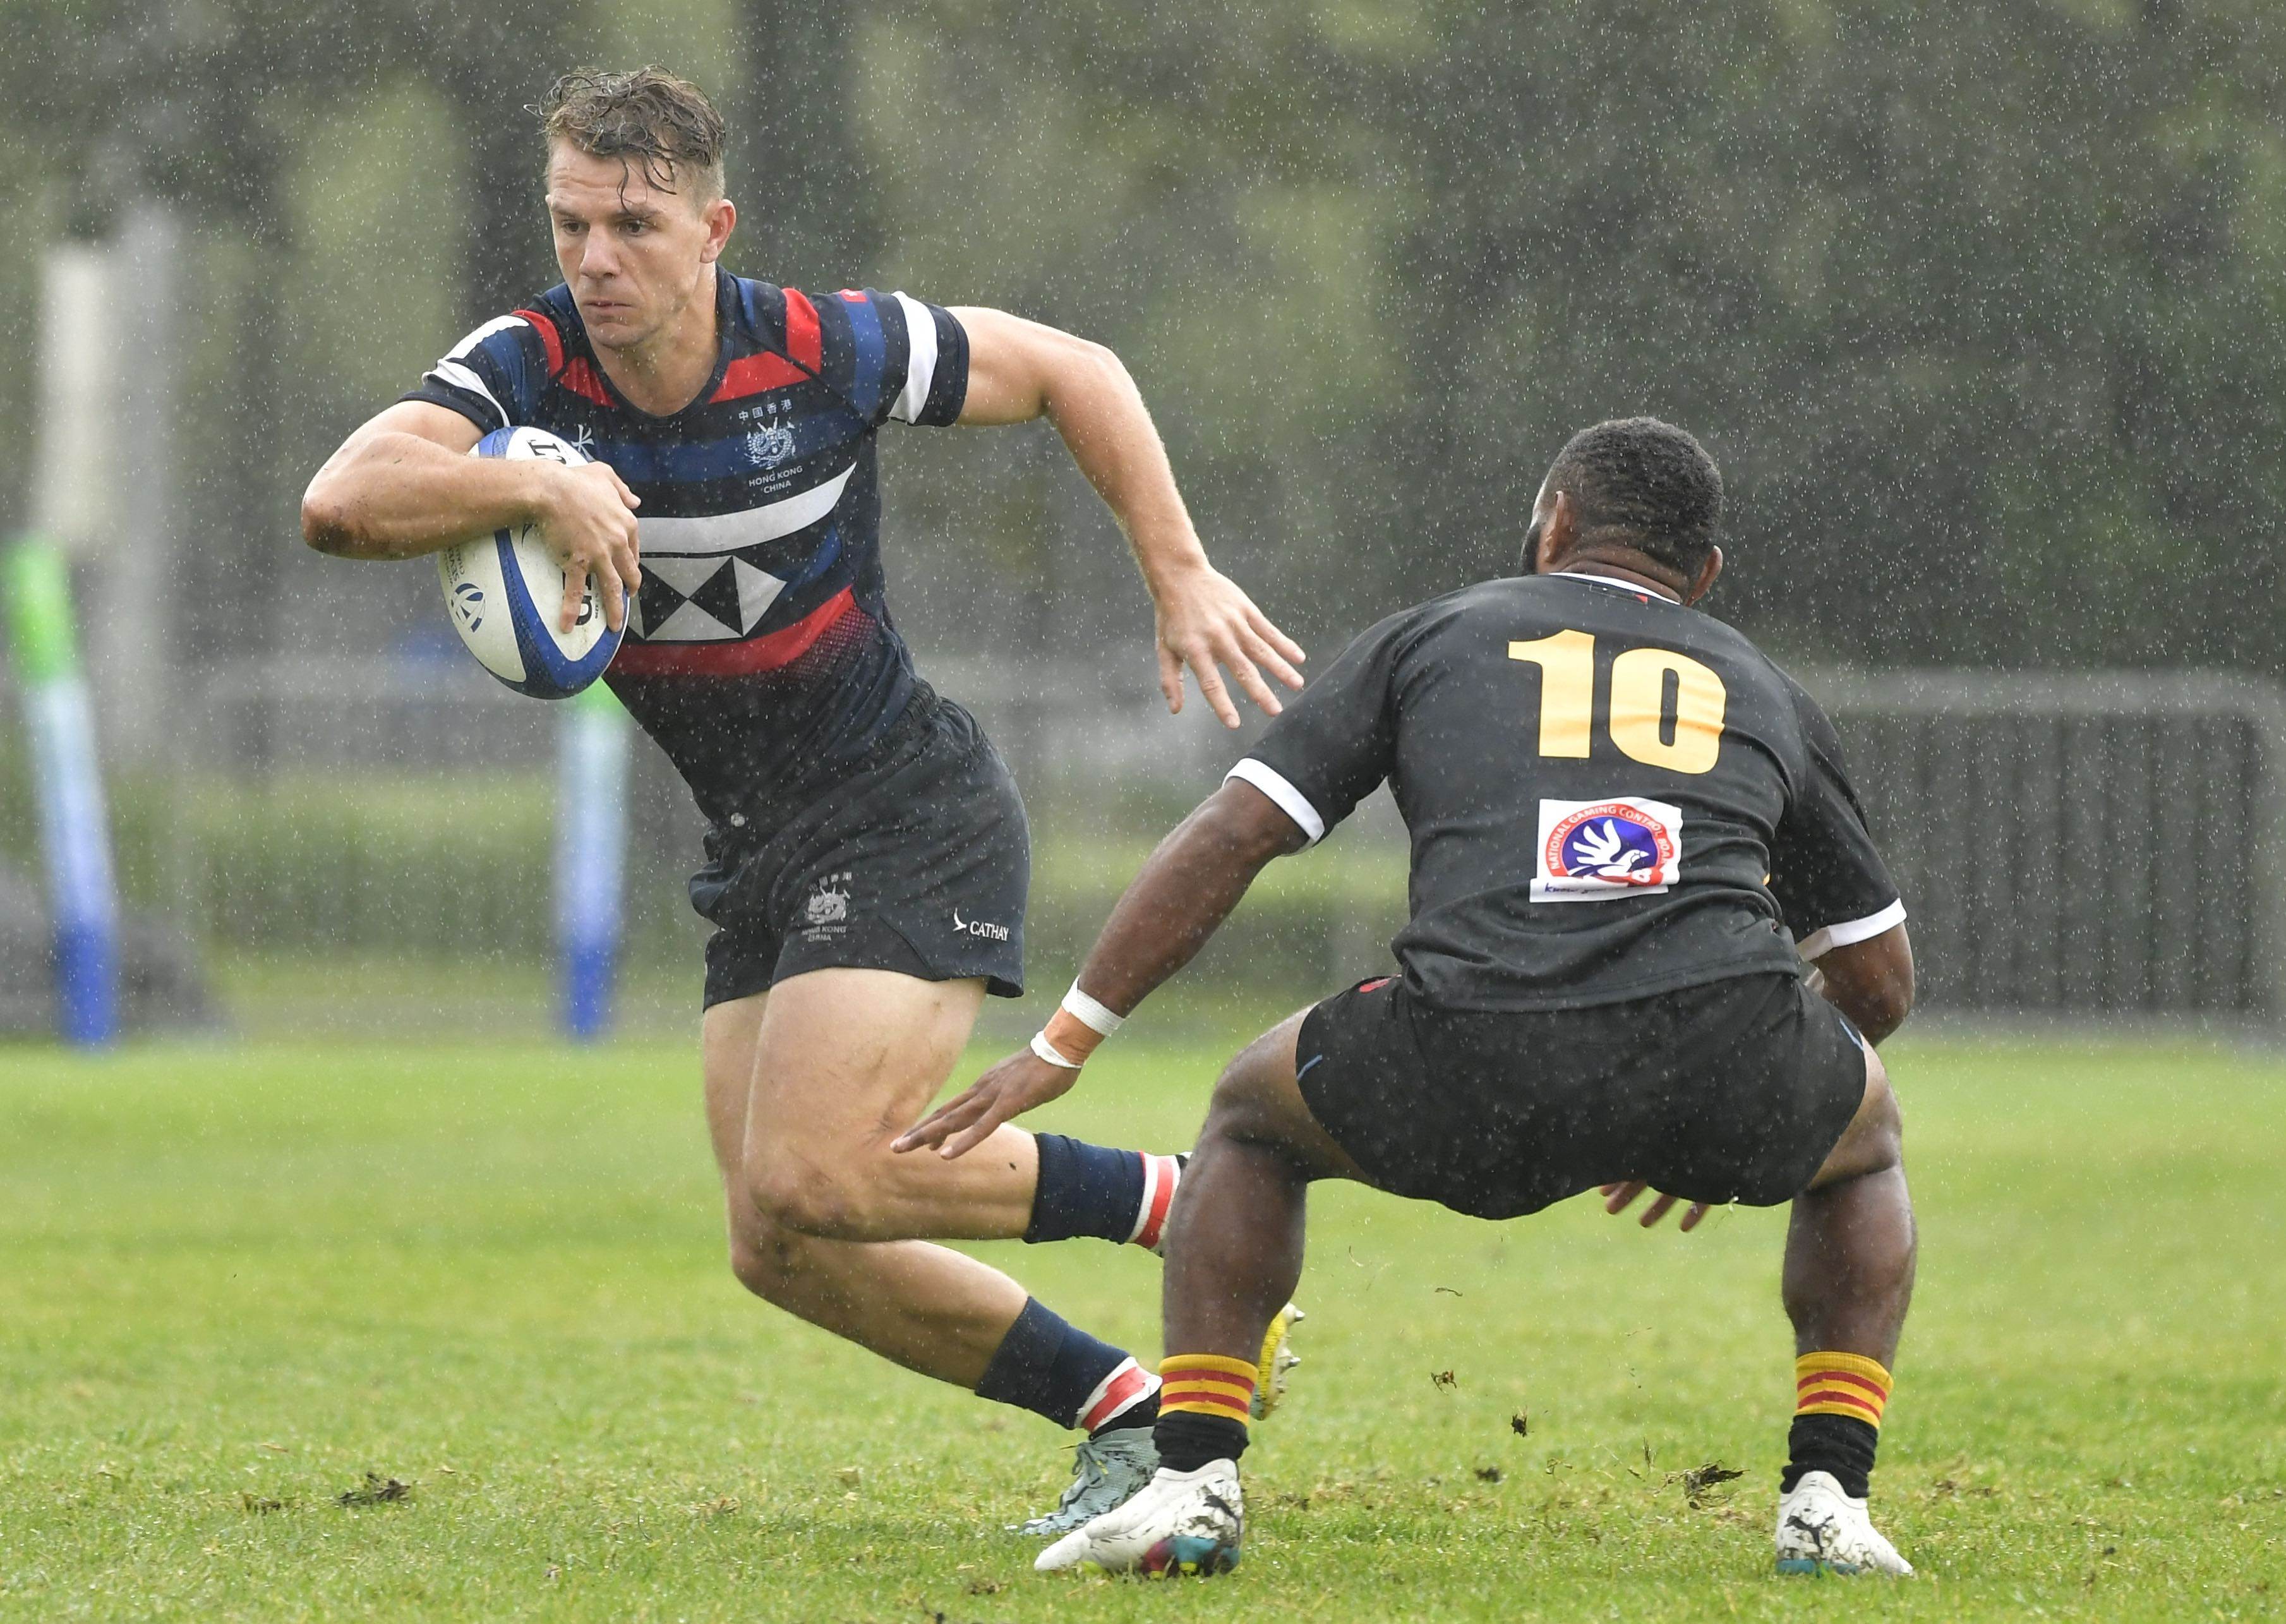 Hong Kong’s Seb Brien attacks in the rain against Papua New Guinea in his side’s first game at the HSBC World Rugby Challenger Series in Stellenbosch, South Africa. Photo: Handout